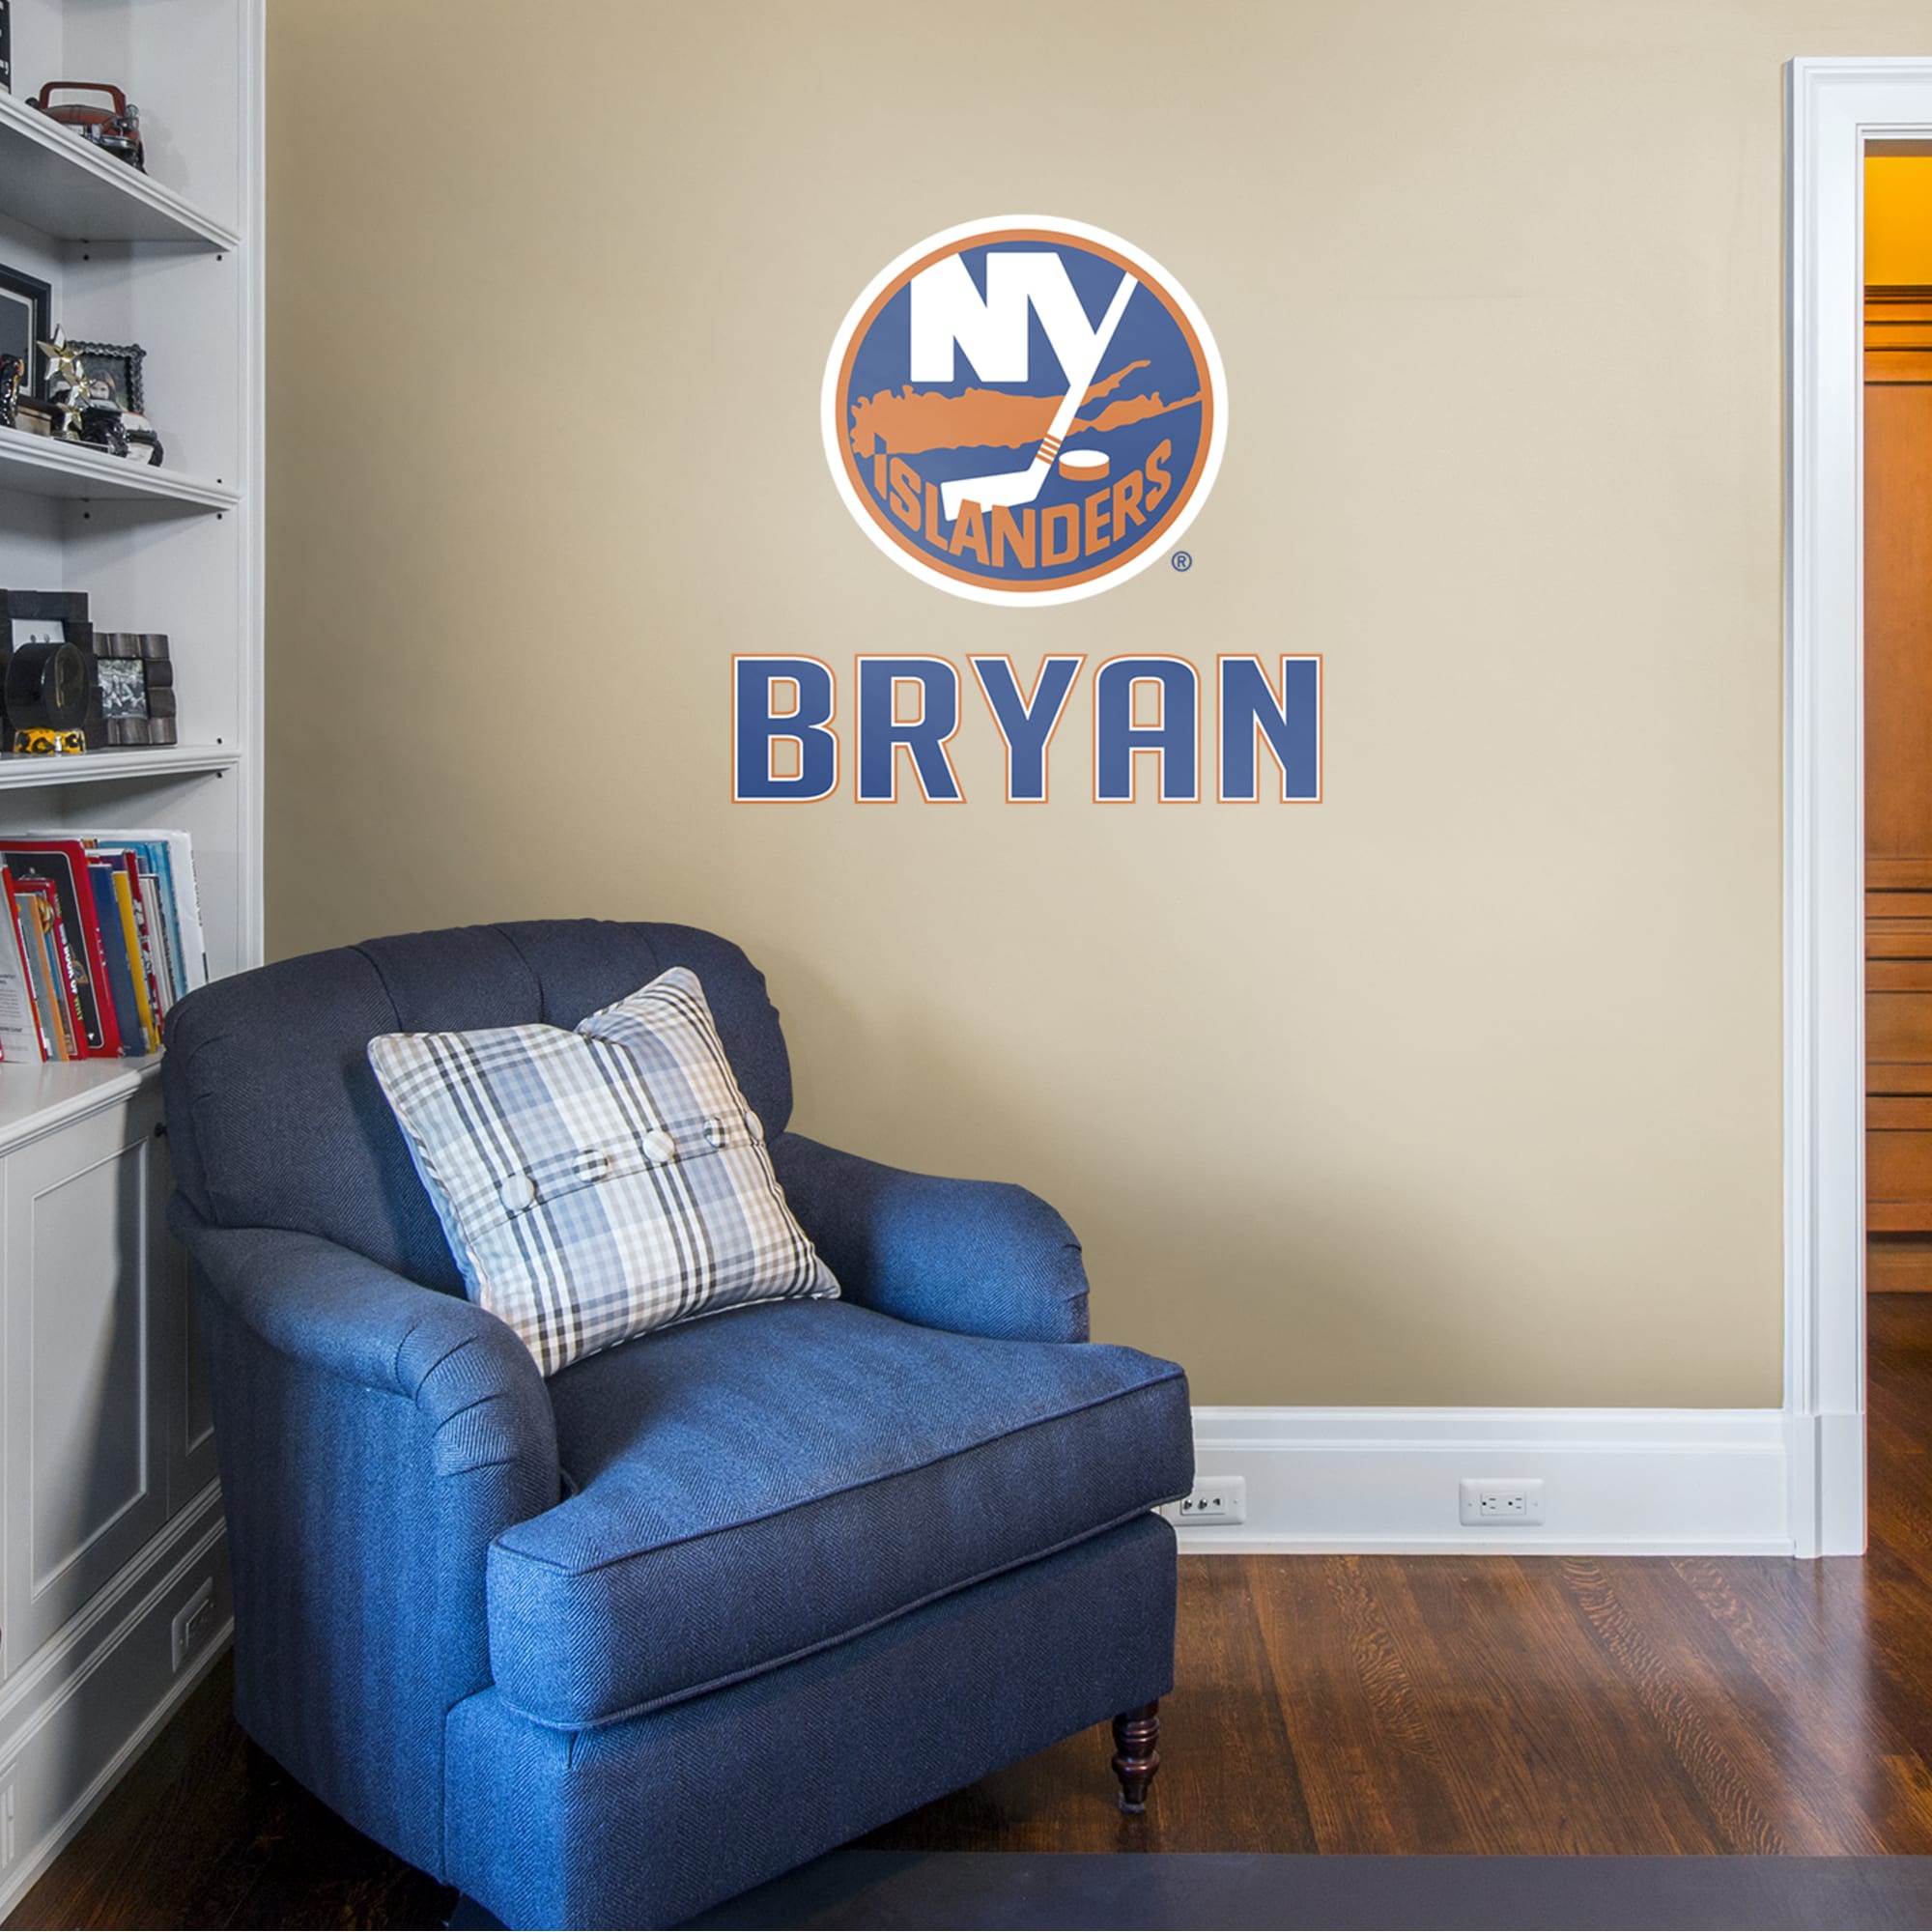 New York Islanders: Stacked Personalized Name - Officially Licensed NHL Transfer Decal in Blue (39.5"W x 52"H) by Fathead | Viny